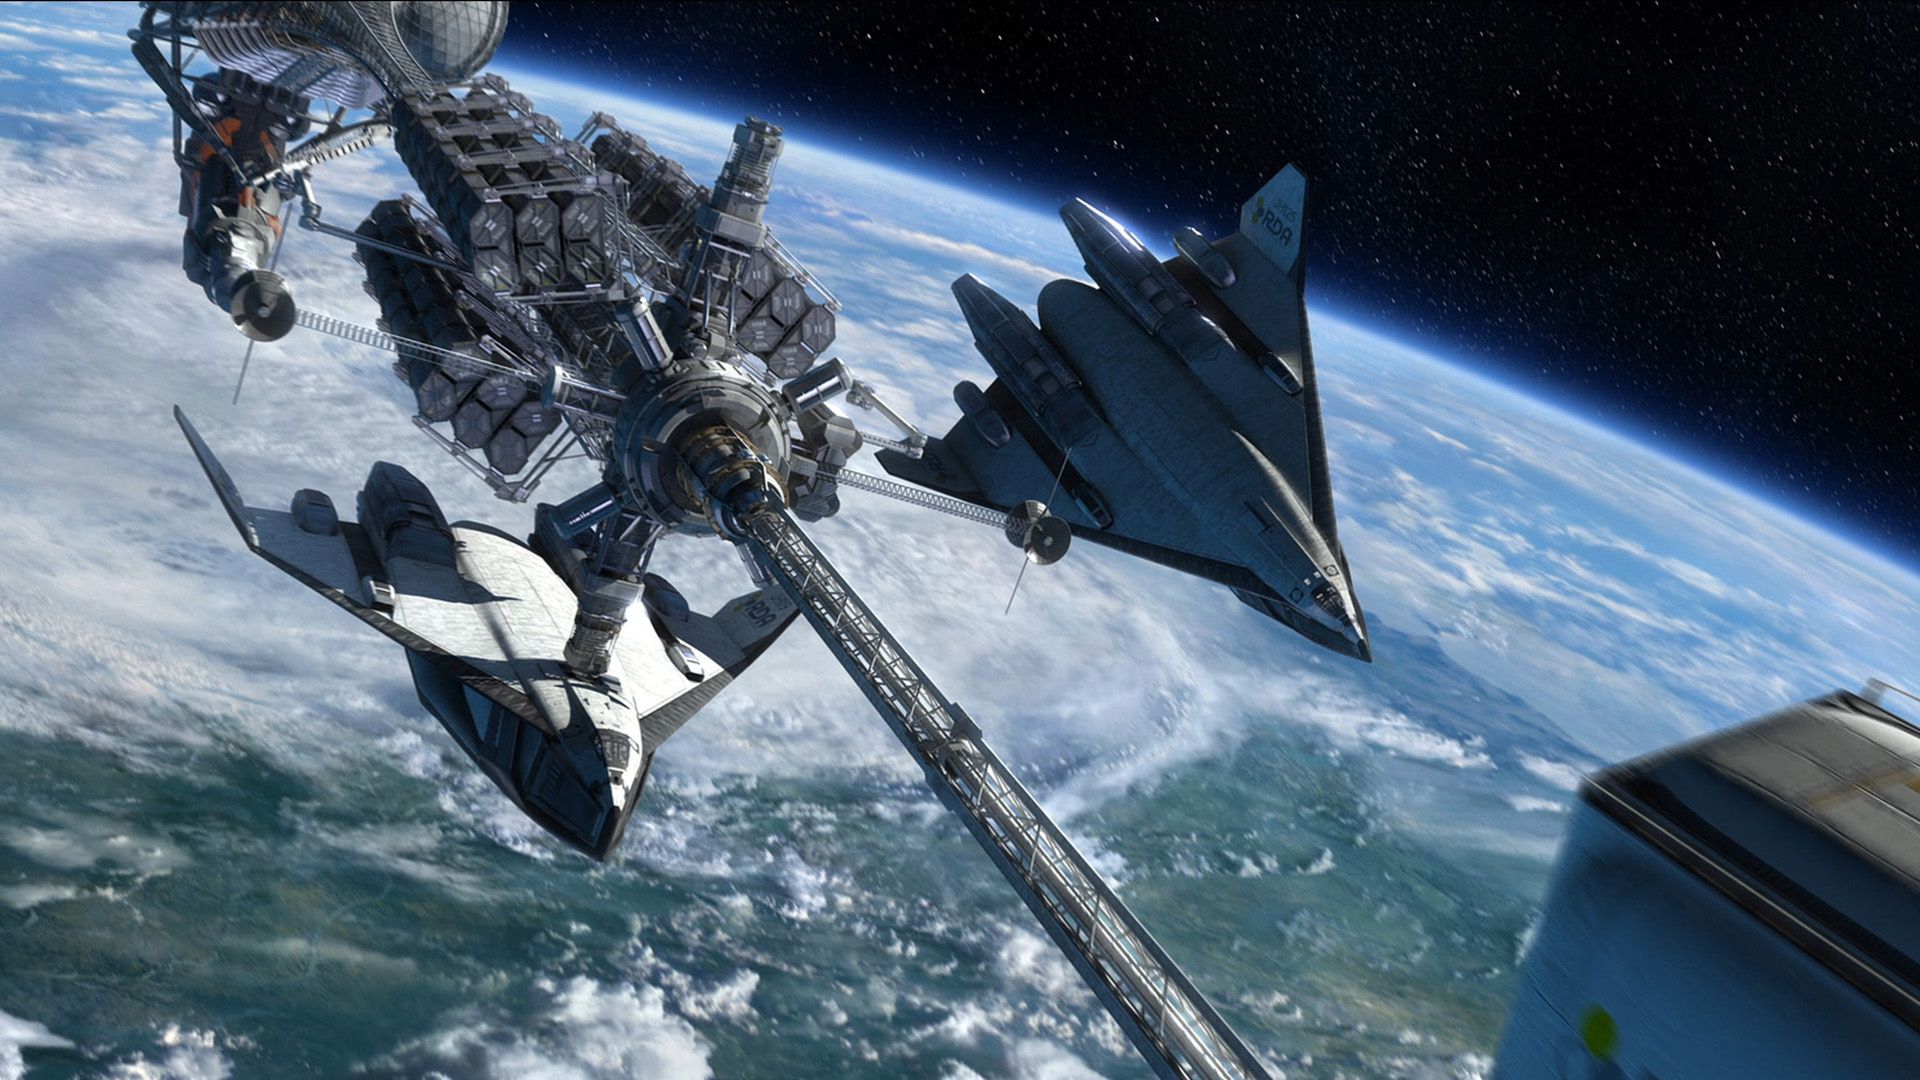 Wallpaper, planet, vehicle, movies, science fiction, spaceship, Avatar, space station, Pandora, screenshot, spacecraft, atmosphere of earth 1920x1080